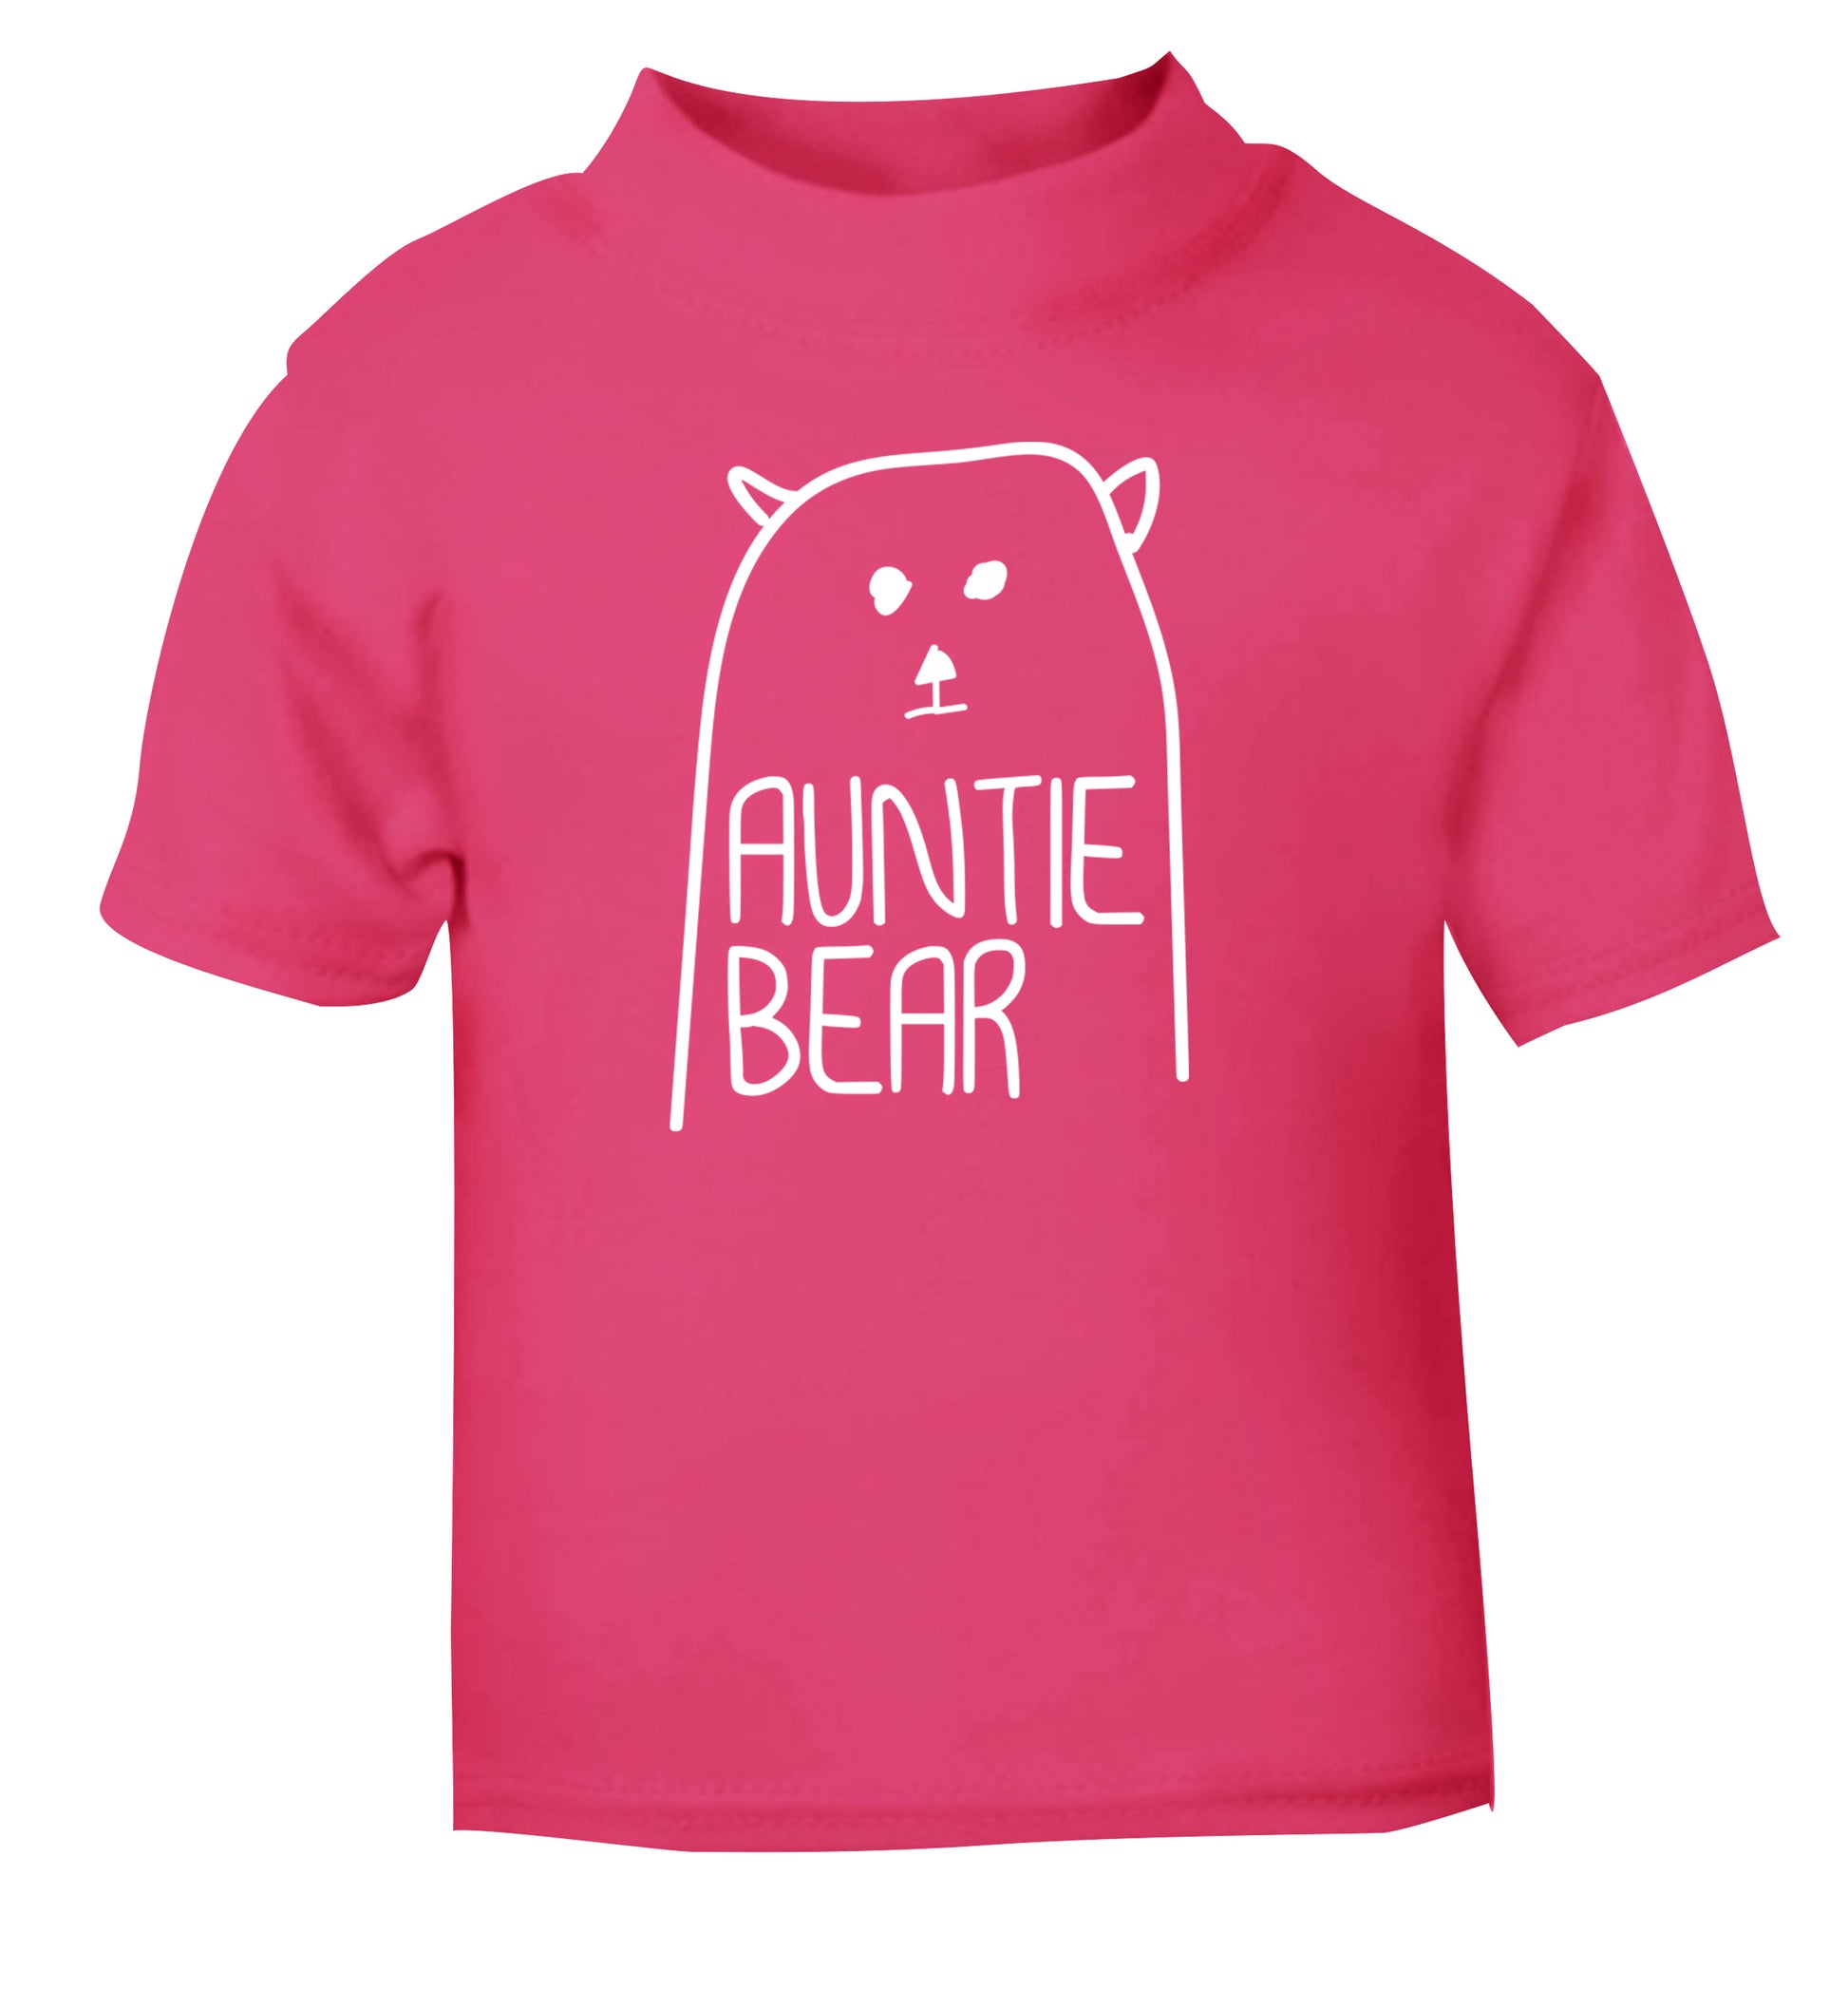 Auntie bear pink Baby Toddler Tshirt 2 Years